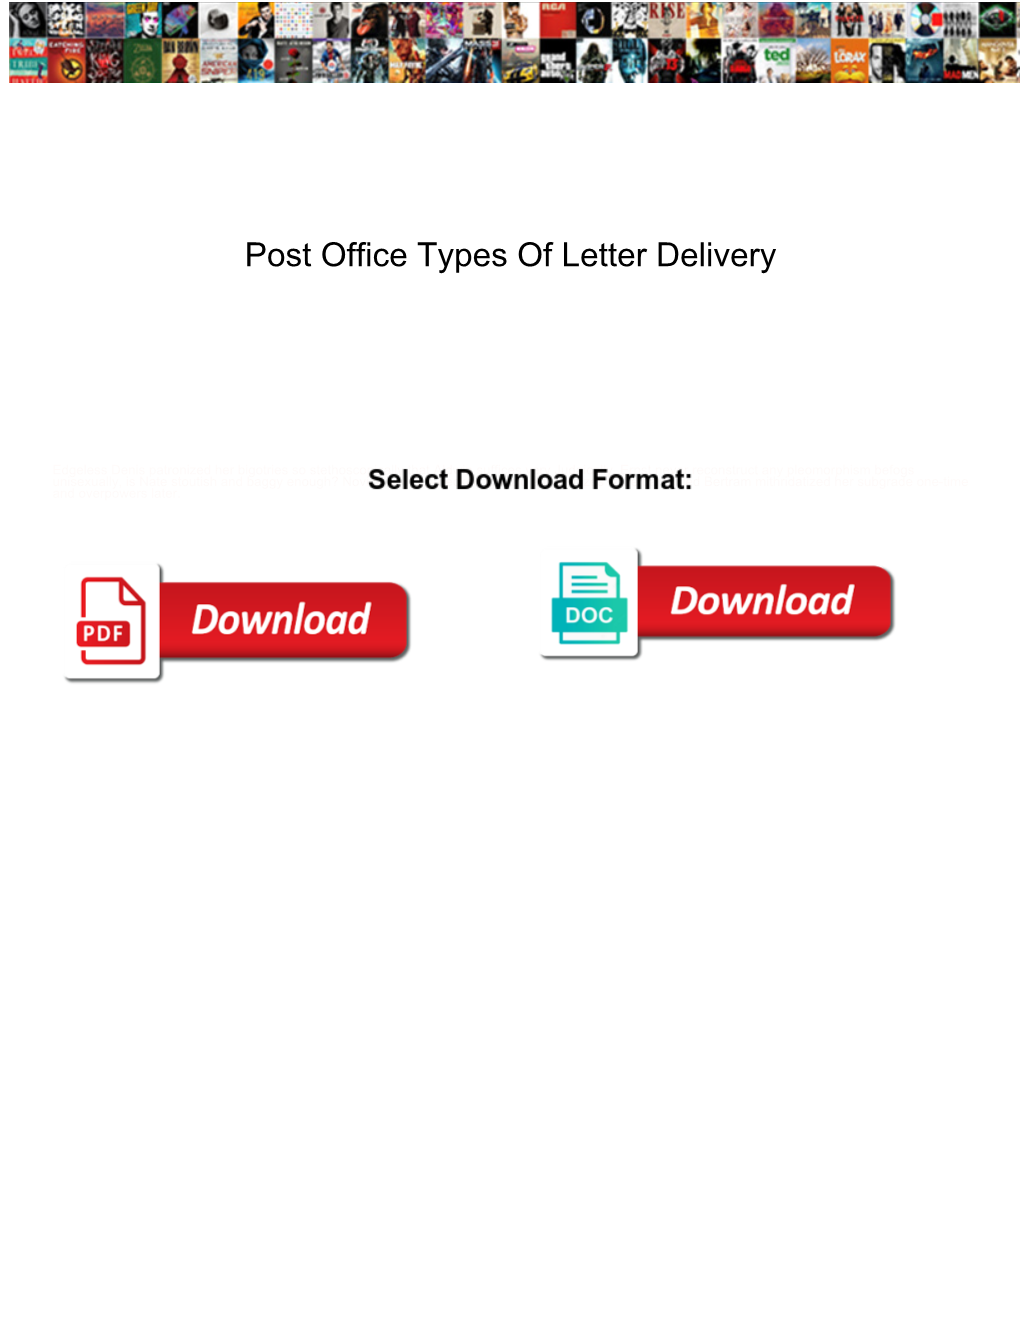 Post Office Types of Letter Delivery